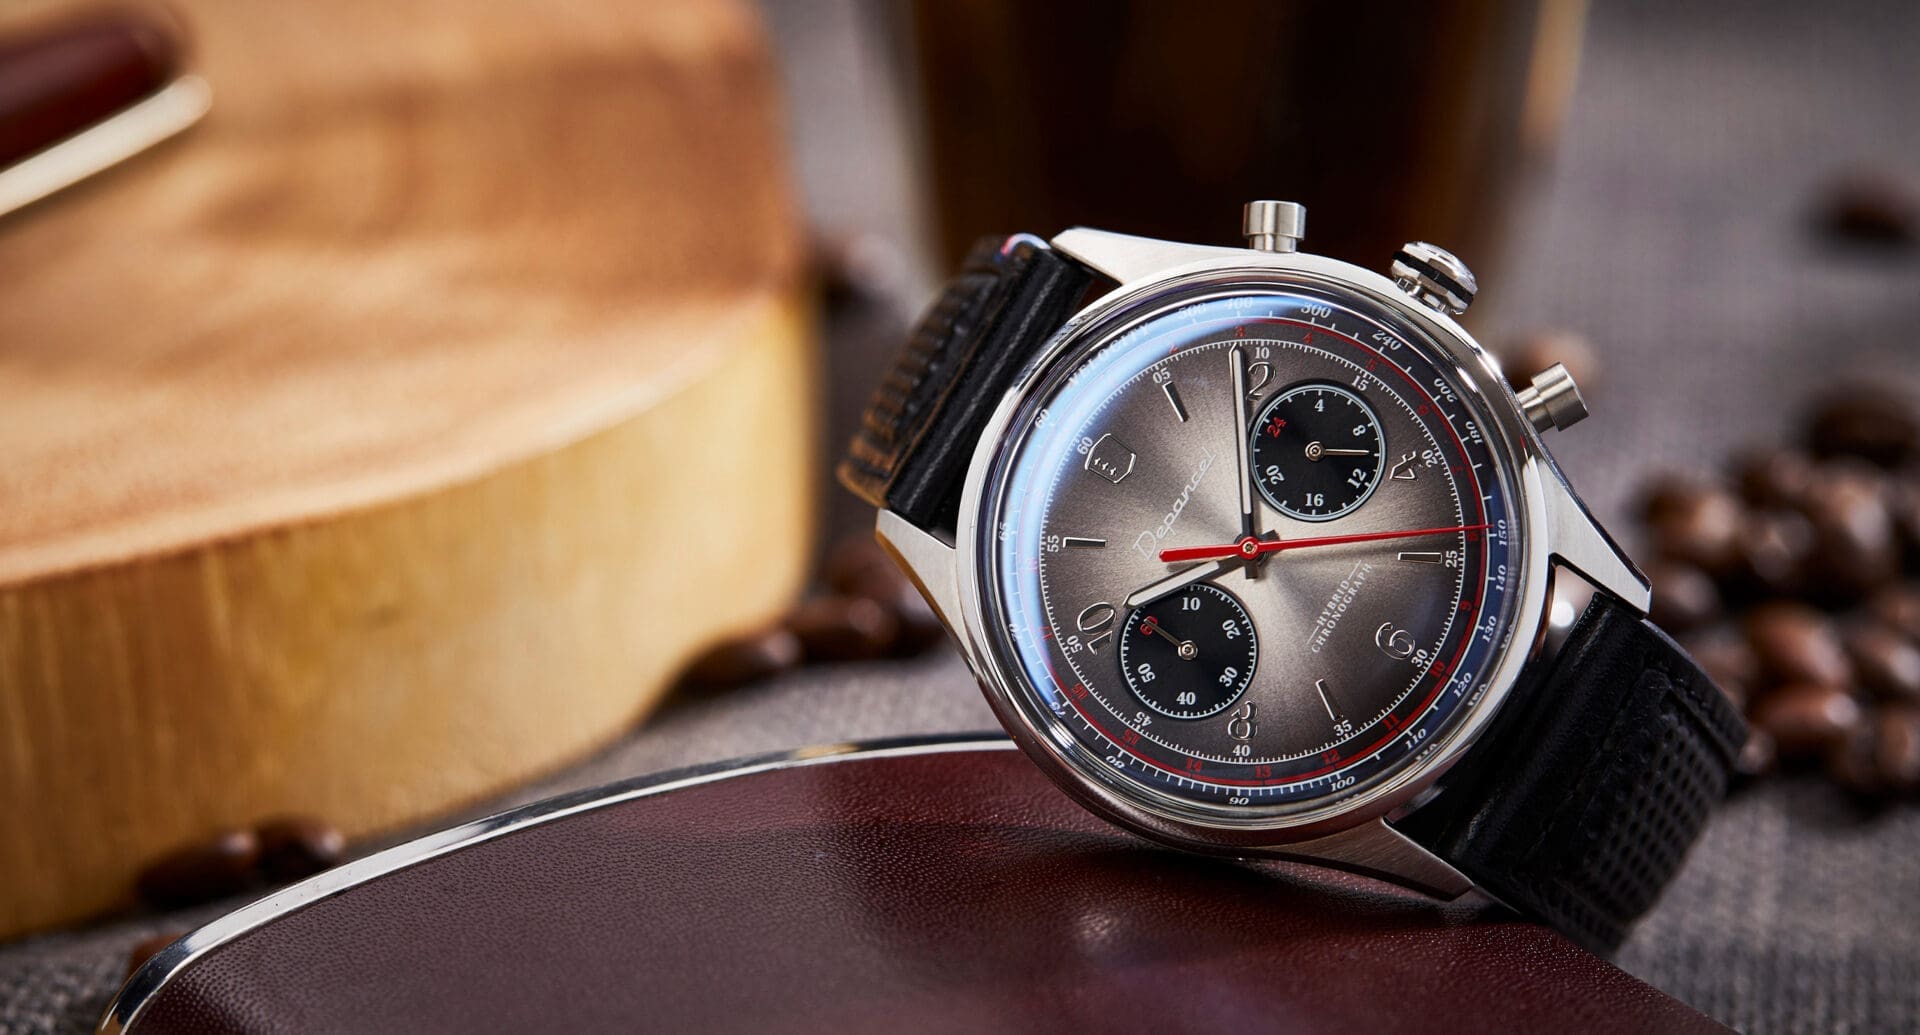 INTRODUCING: The Depancel Serie-A Stradale